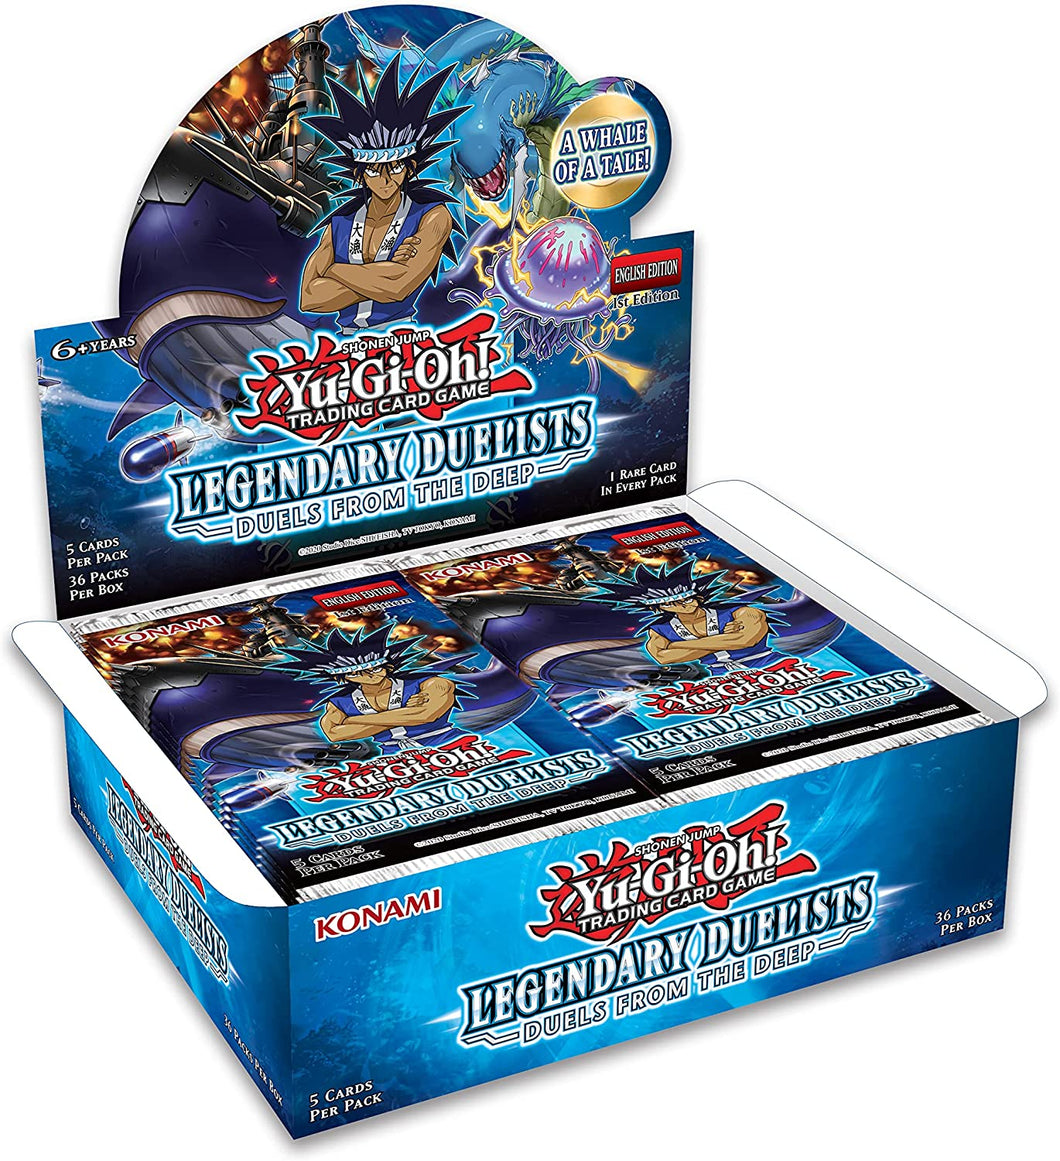 Legendary Duelists: Duels From The Deep Booster Box (36 Packs)